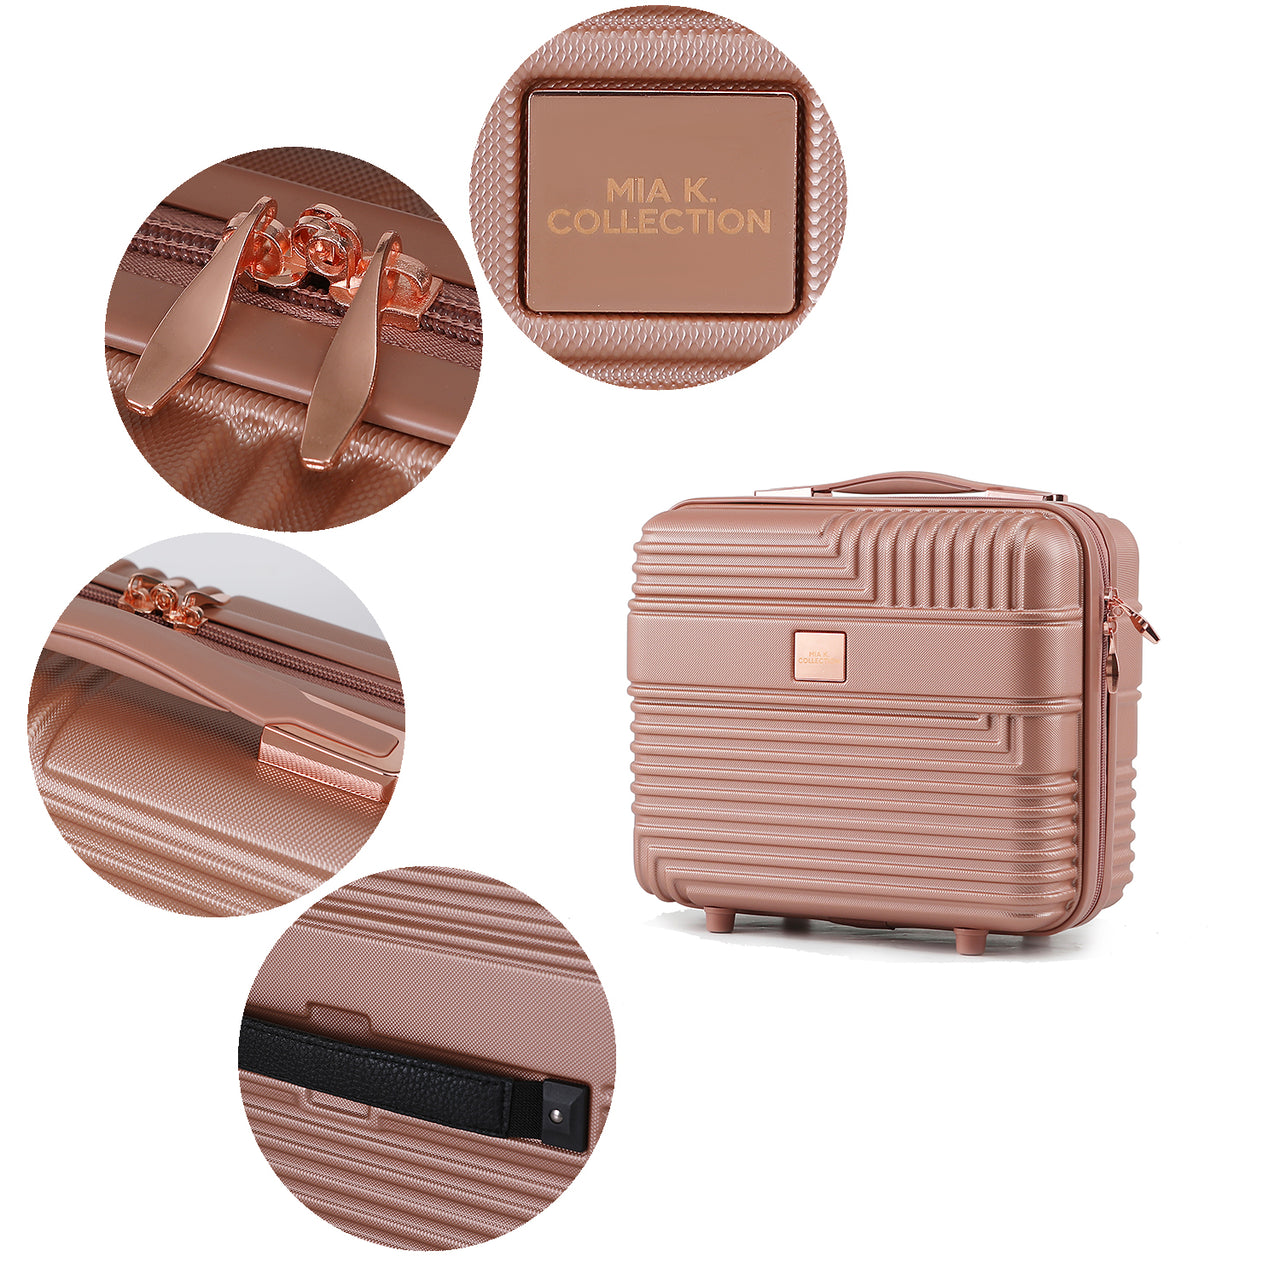 Mykonos Luggage Set with a Medium Carry-on and Small Cosmetic Case - Mercantile Mountain